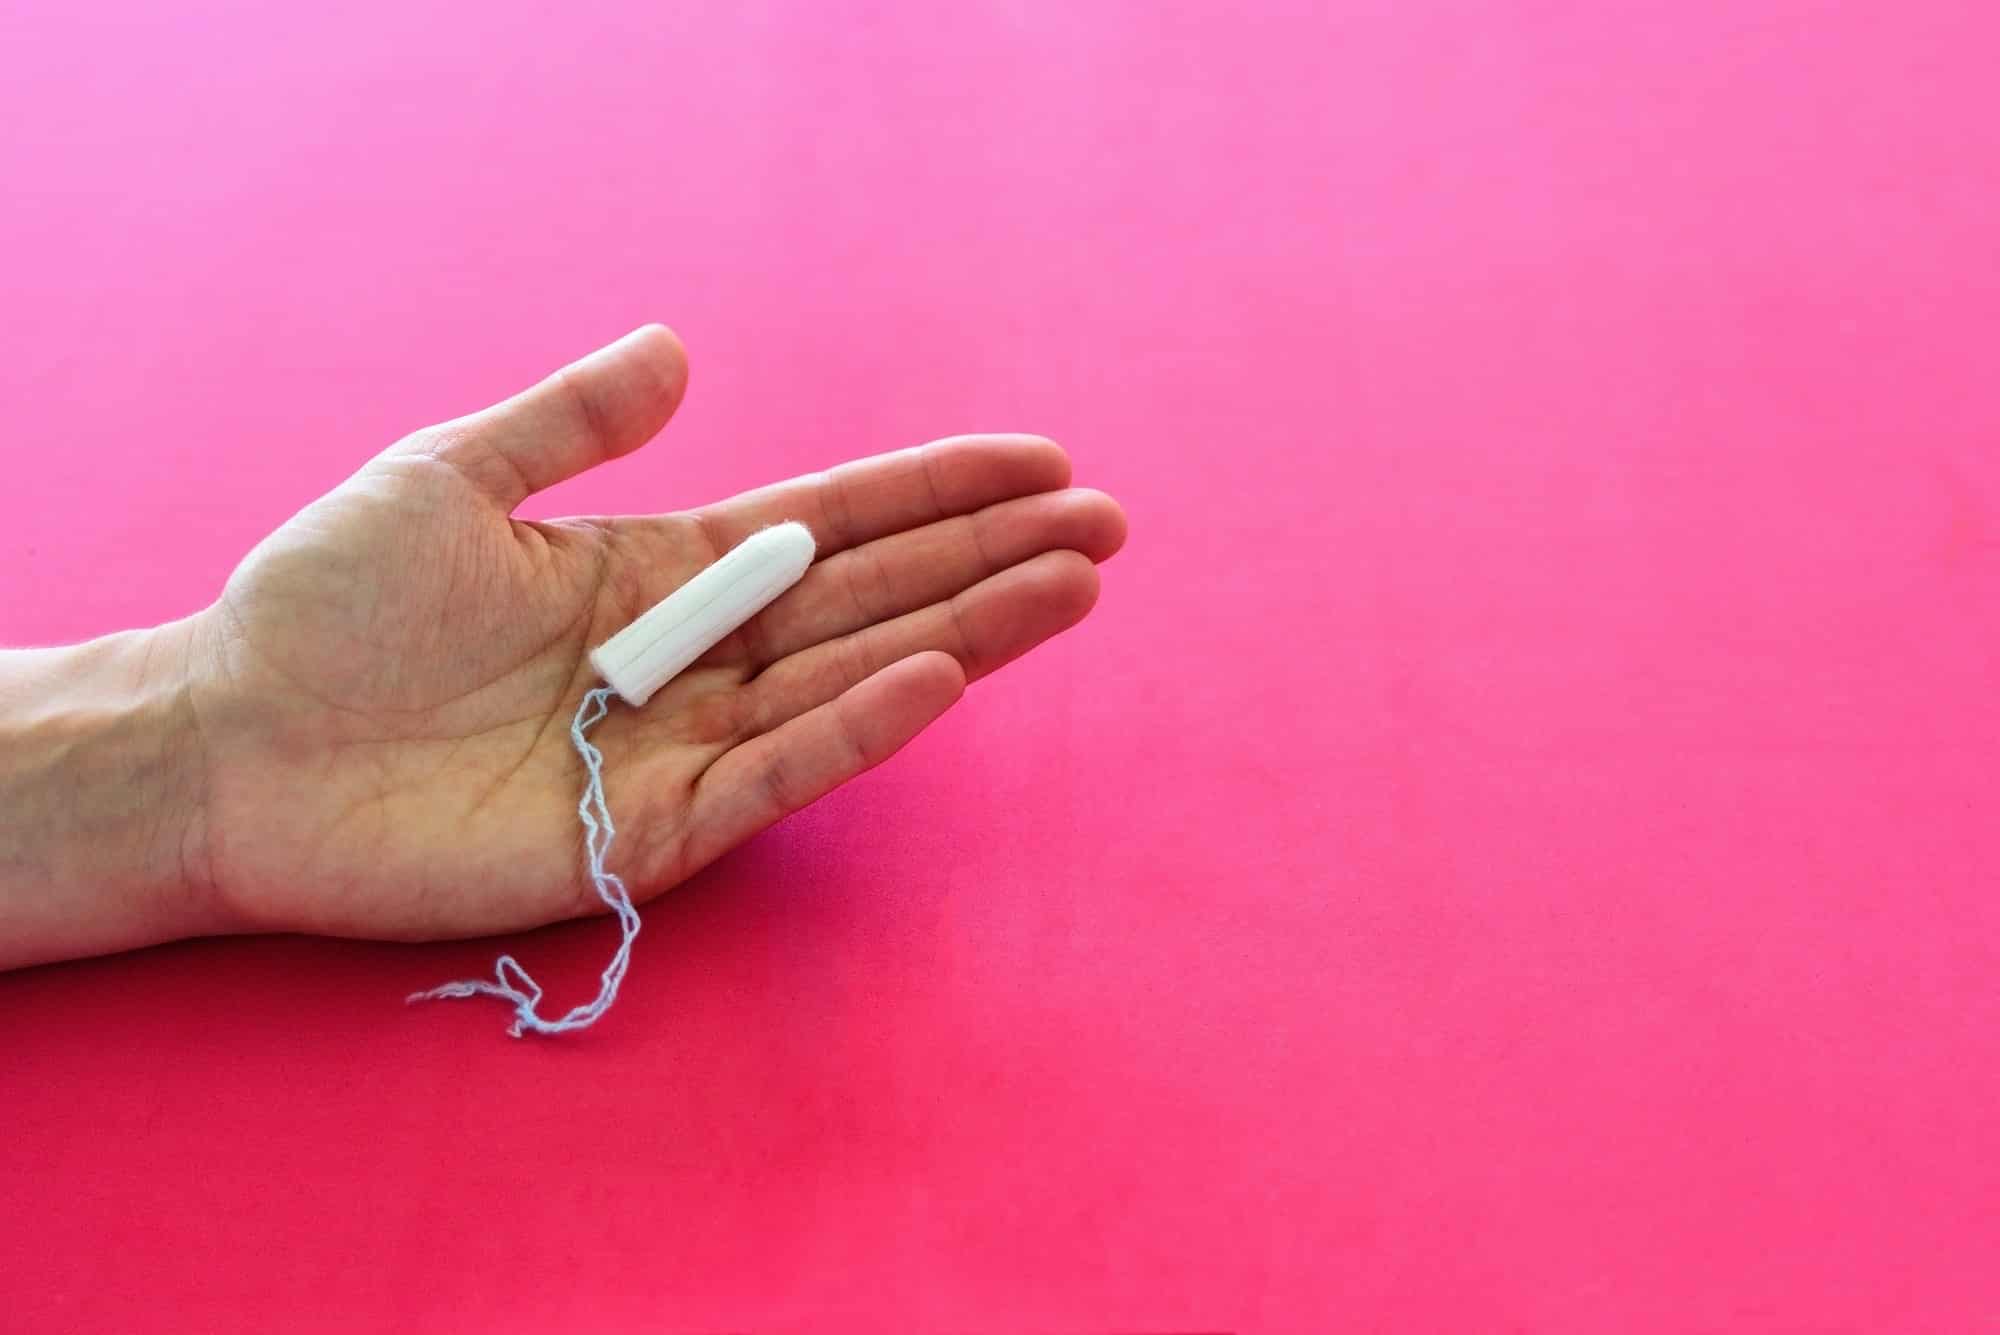 hygienic tampon for women on pink background